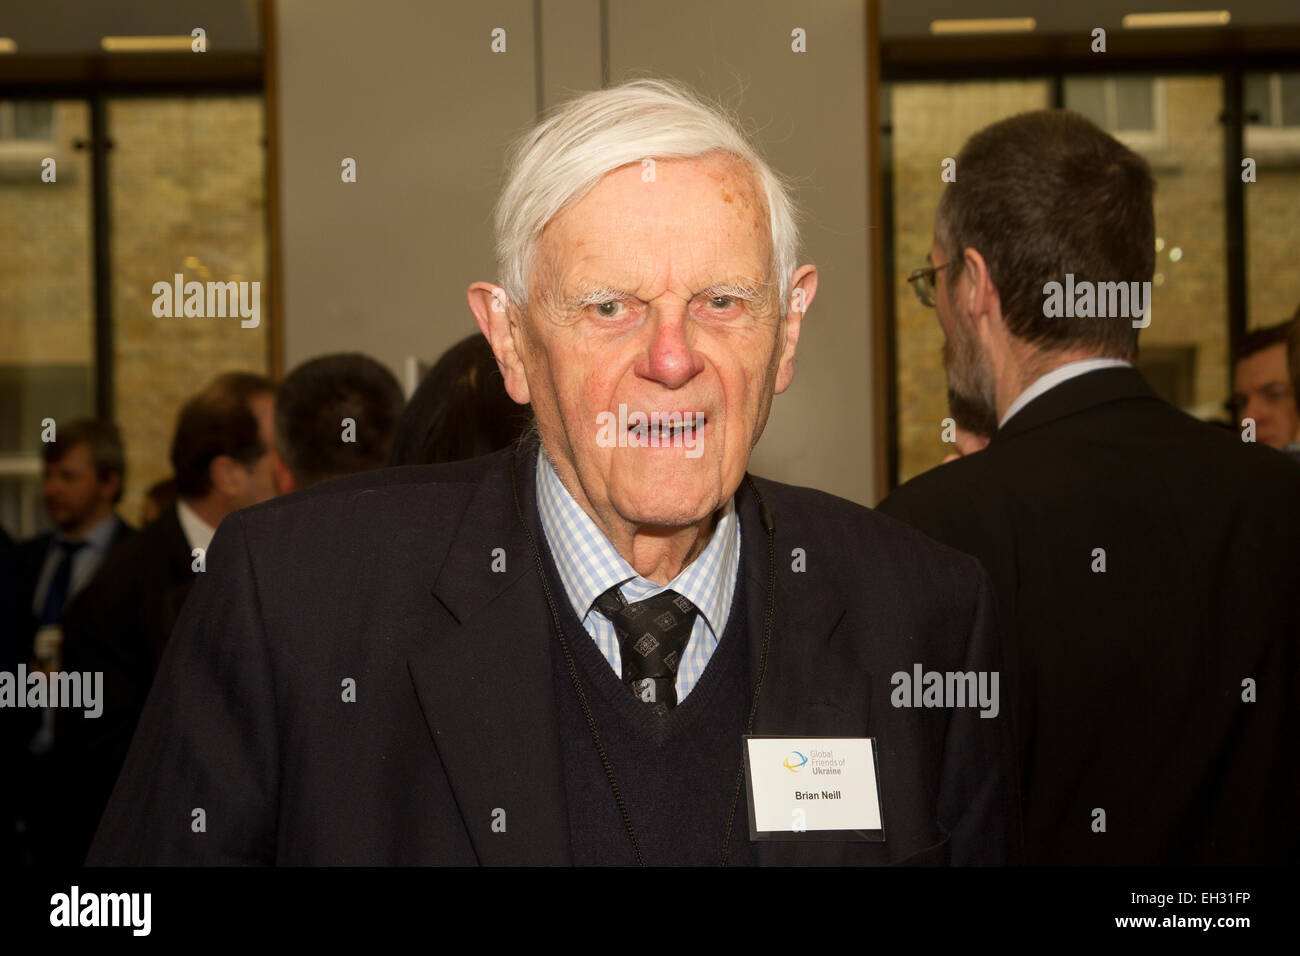 Brian Niel at Global Friends of Ukraine photographic exhibition at the House of Commons to launch Victims of War Support Project. London, United Kingdom. 05.03.2015 Stock Photo